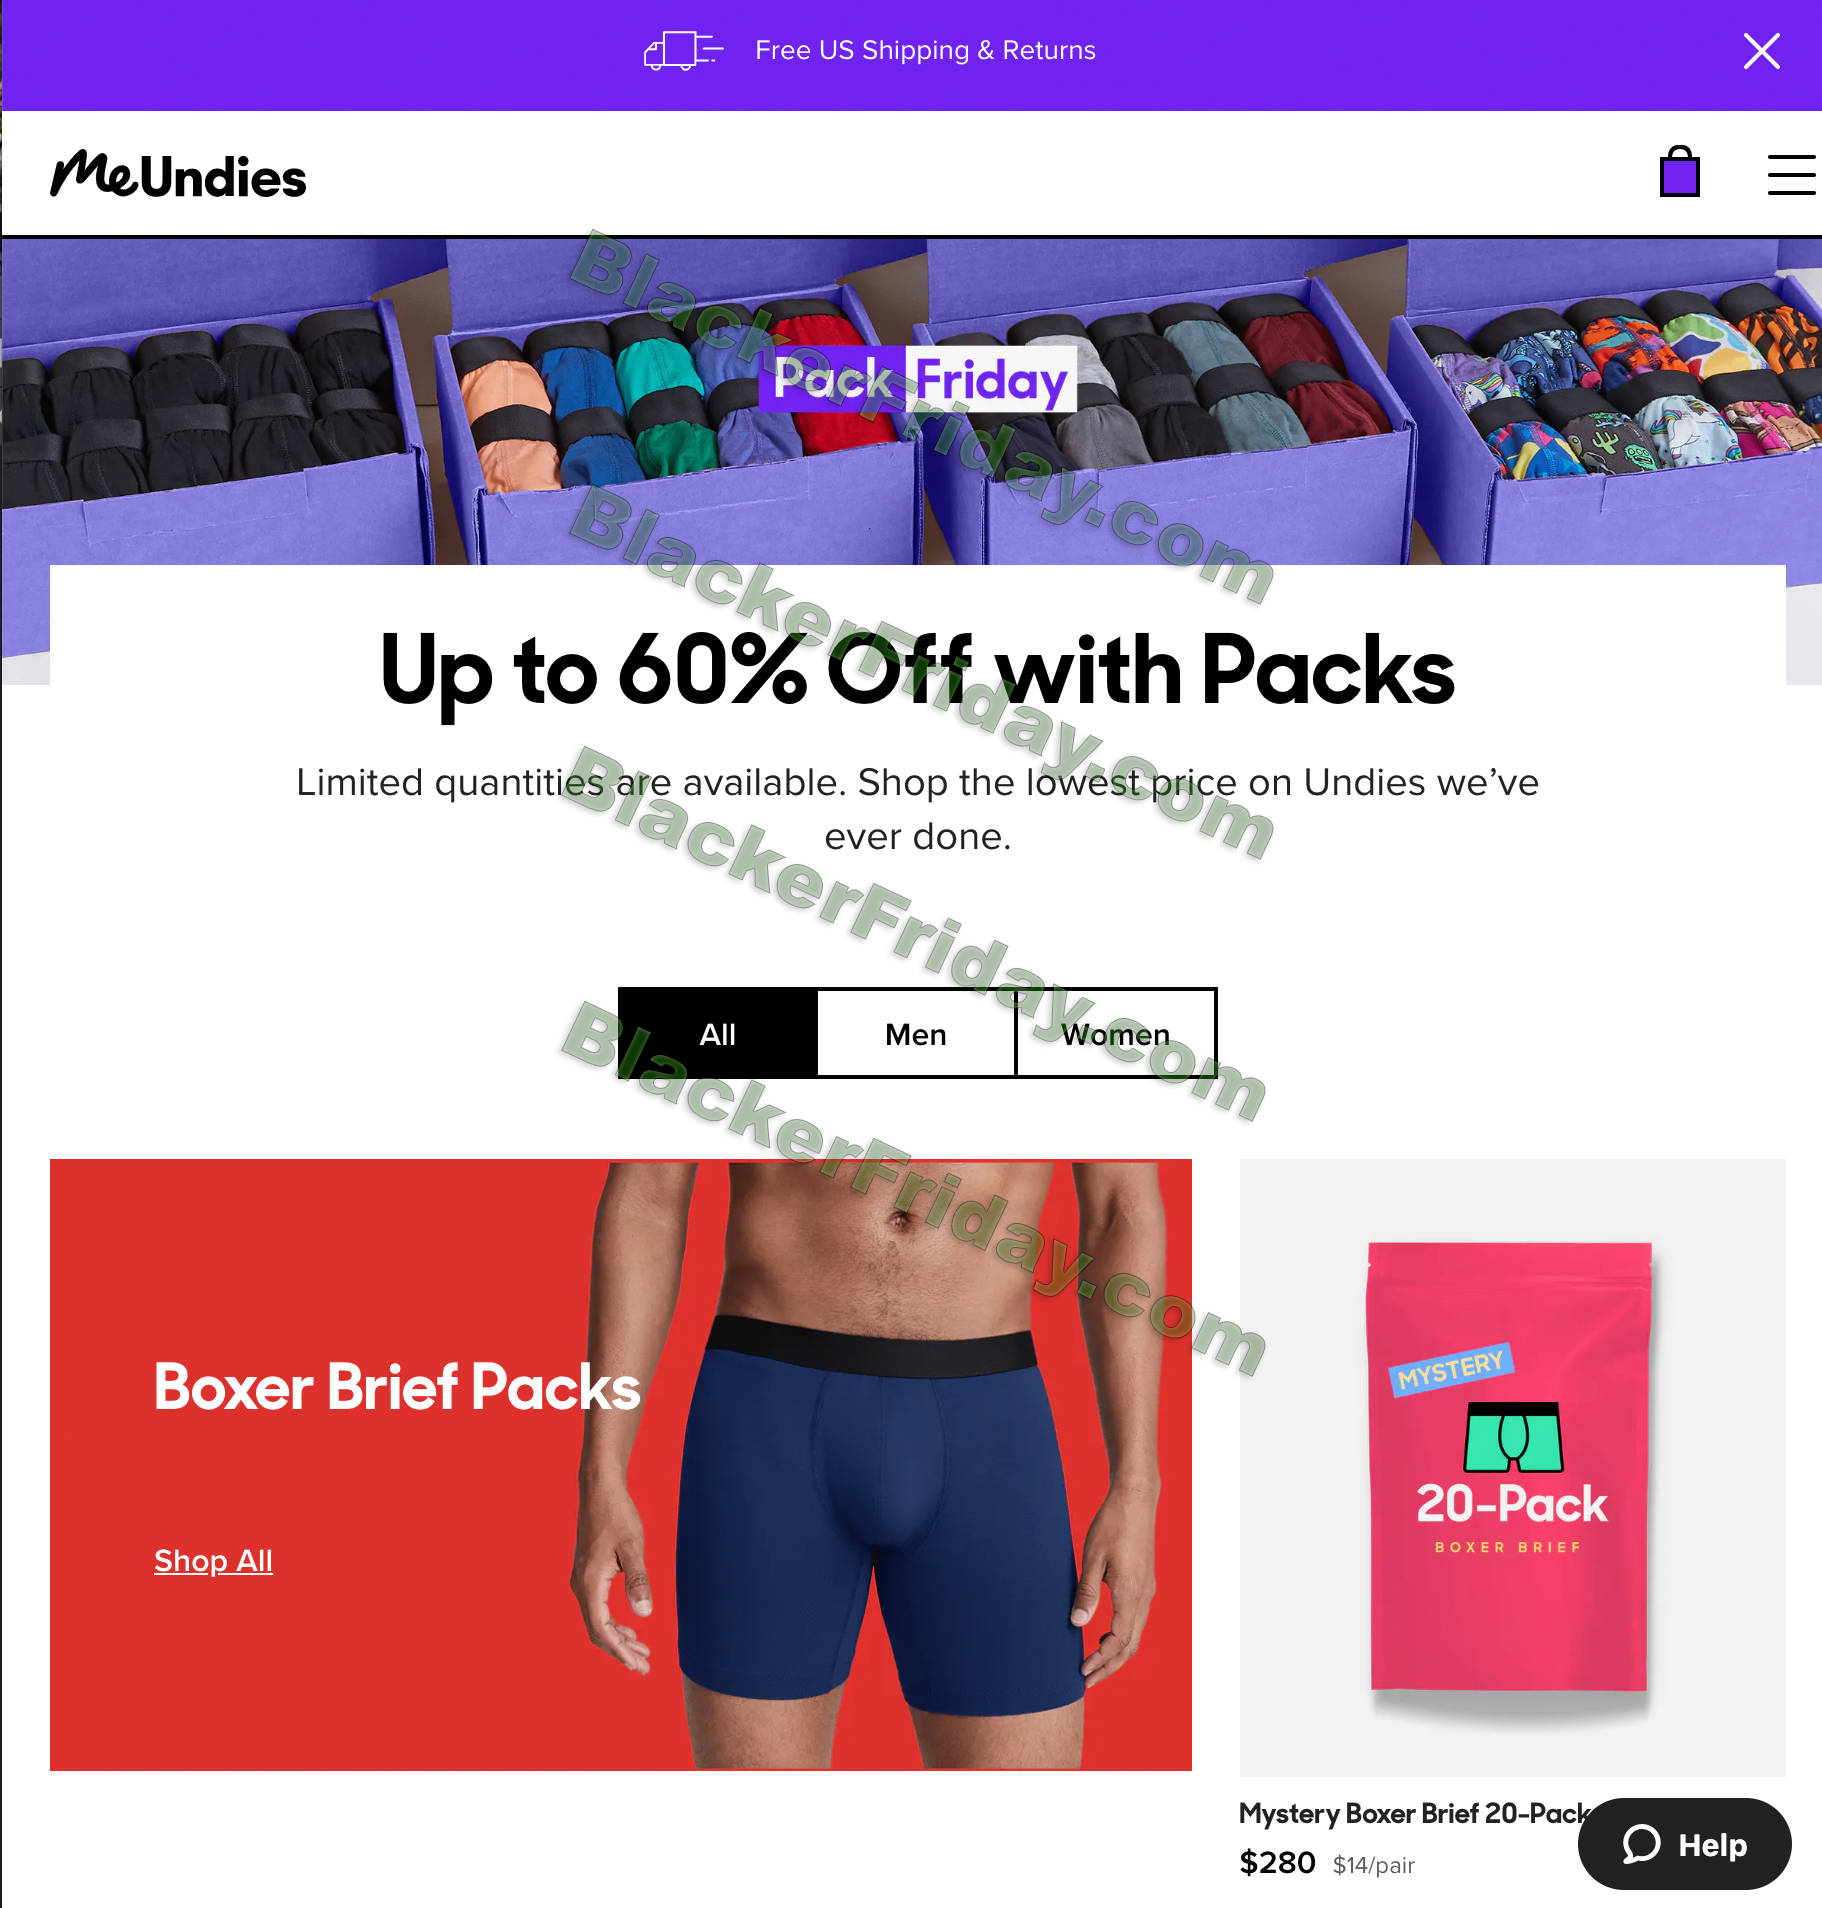 MeUndies Black Friday 2021 Sale - What to Expect - Blacker Friday